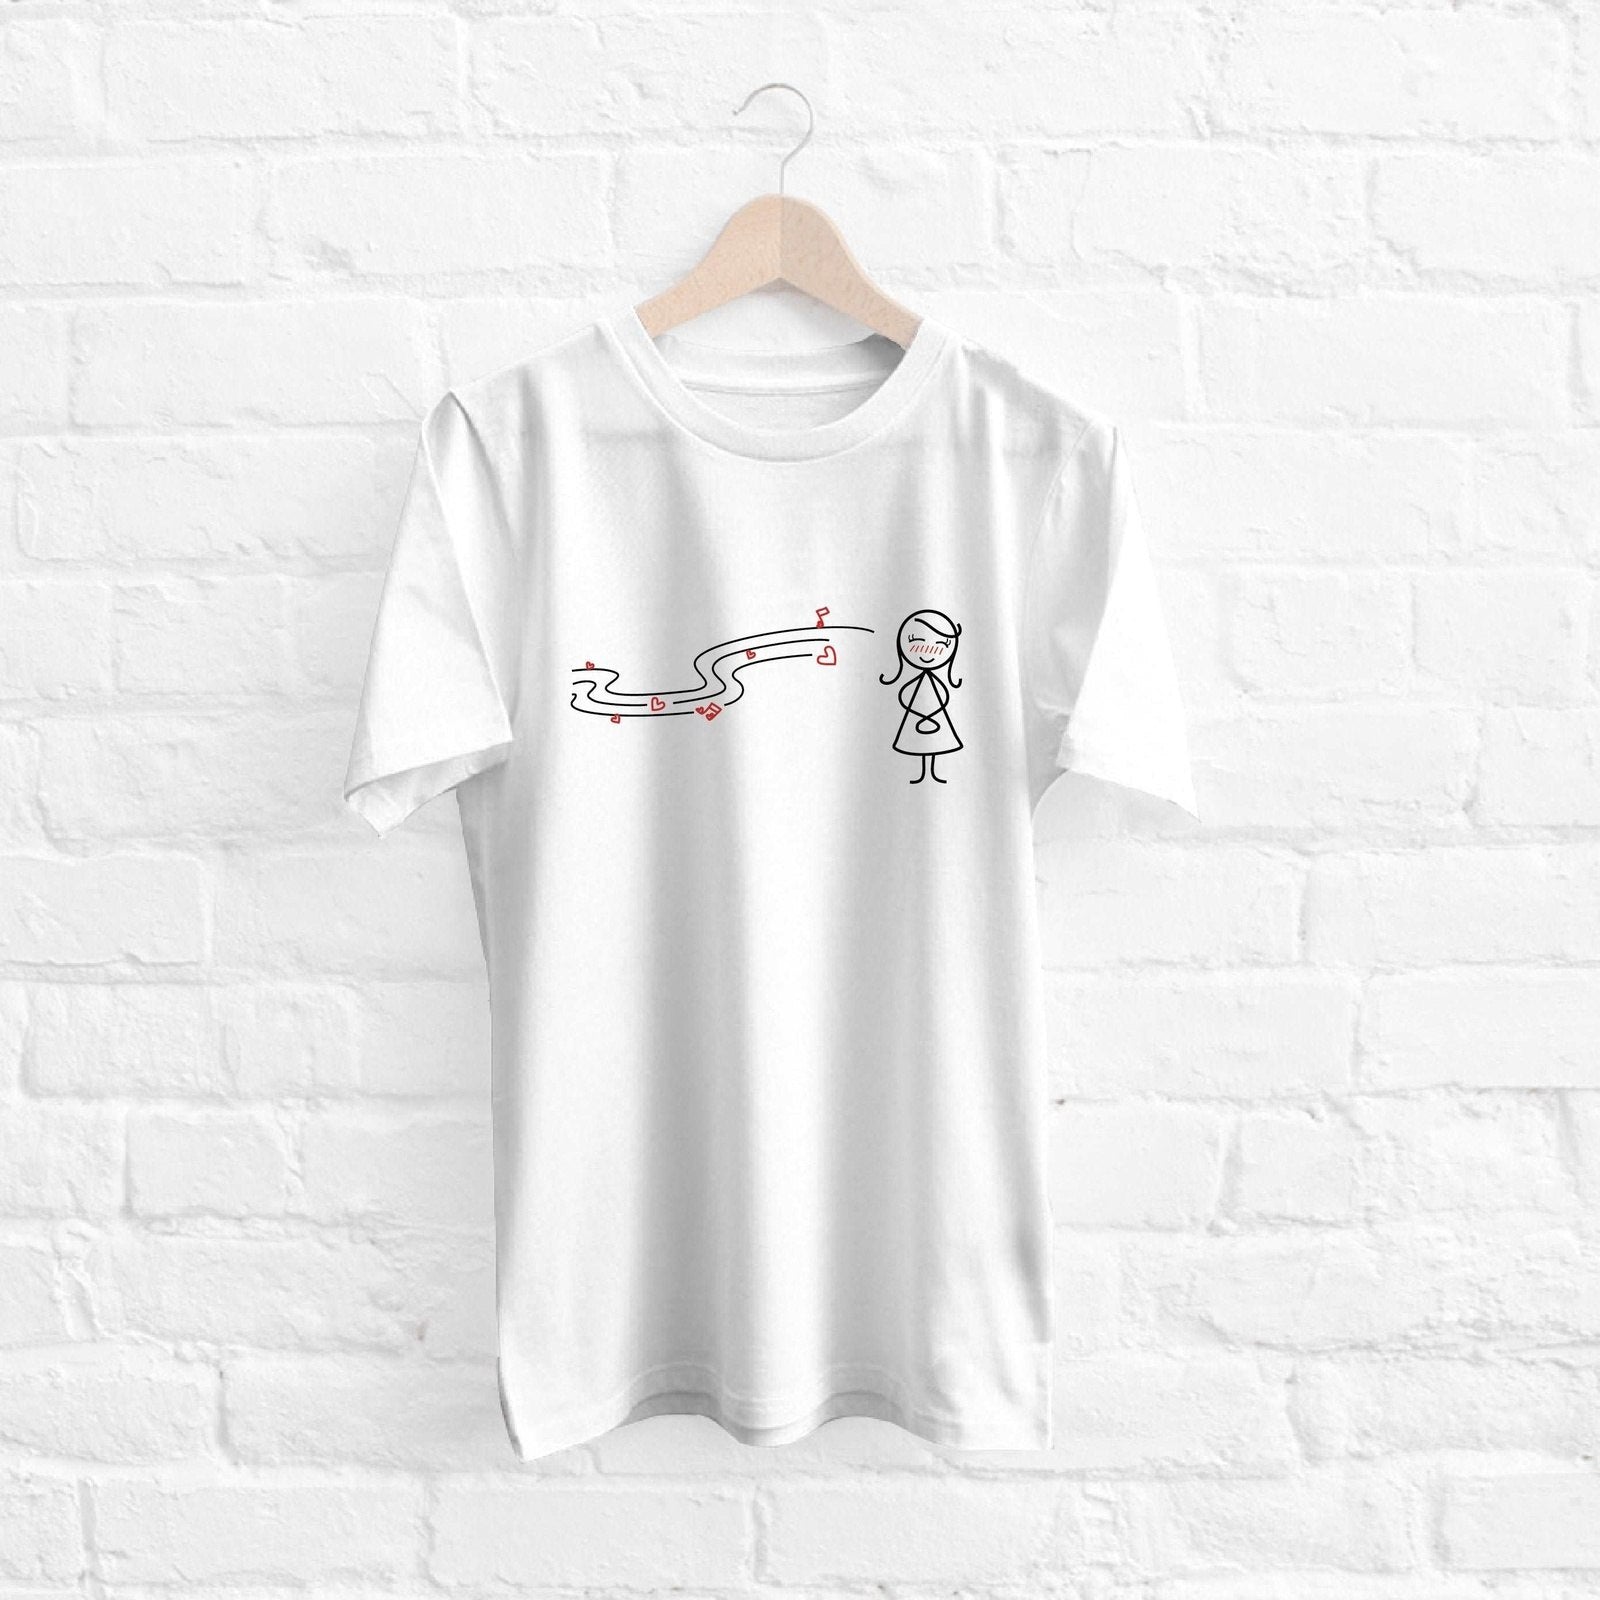 A fabulous white tee featuring a charming, hand-drawn design, perfect for couples and anniversaries. A delightful gift for him or her.